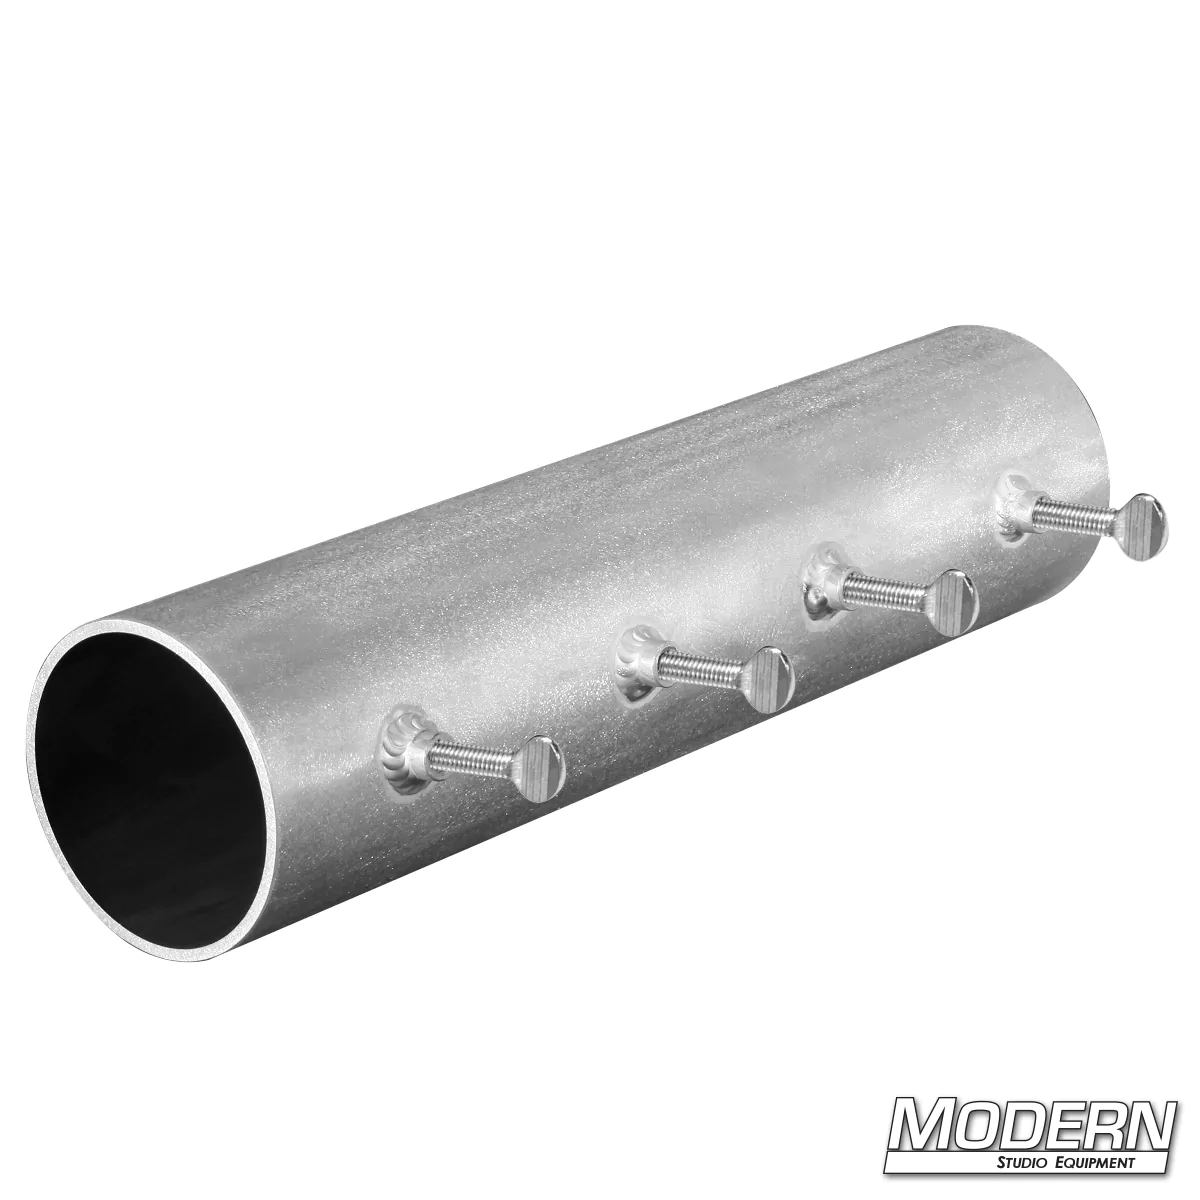 Sleeve for 4-inch Irrigation Pipe